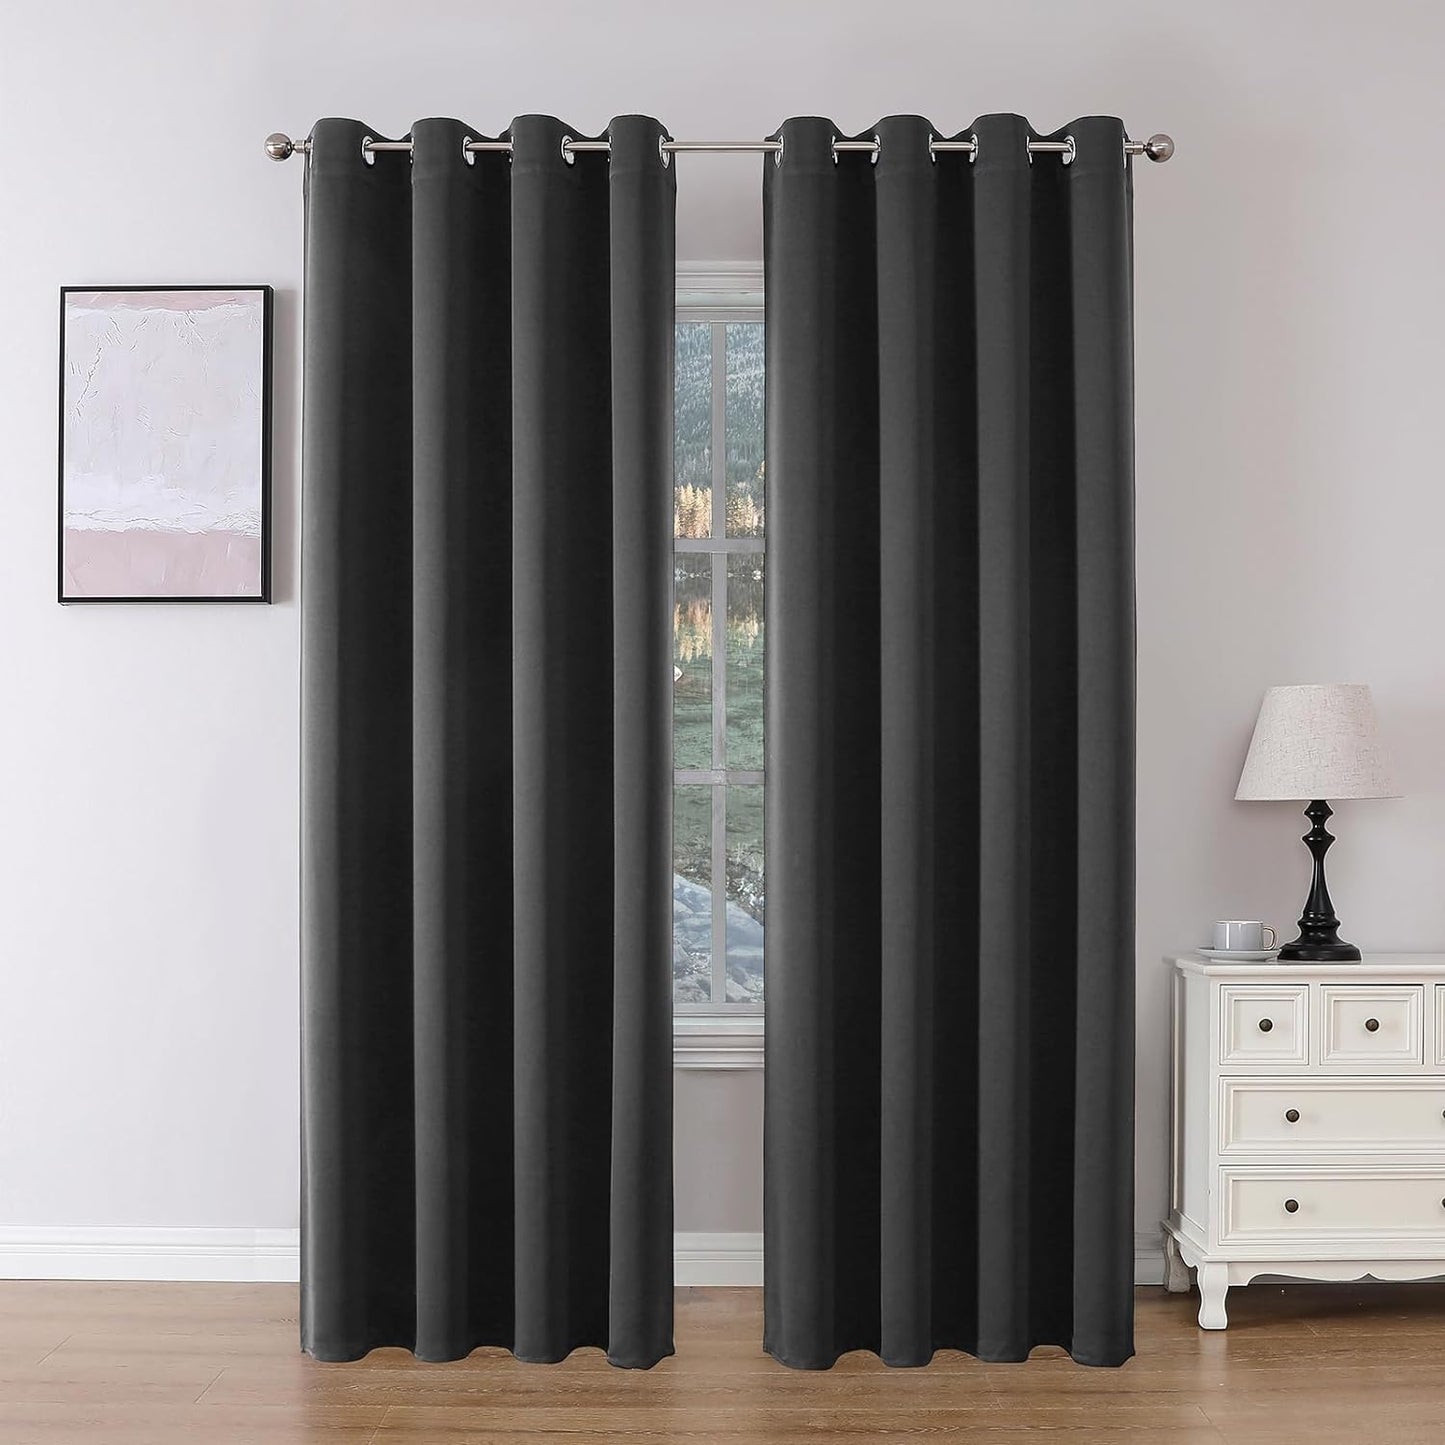 Joydeco Blackout Curtains 84 Inch Length 2 Panels Set, Thermal Insulated Long Curtains& Drapes 2 Burg, Room Darkening Grommet Curtains for Bedroom Living Room Window (Black, W52 X L84 Inch)  Joydeco Grey 52W X 95L Inch X 2 Panels 